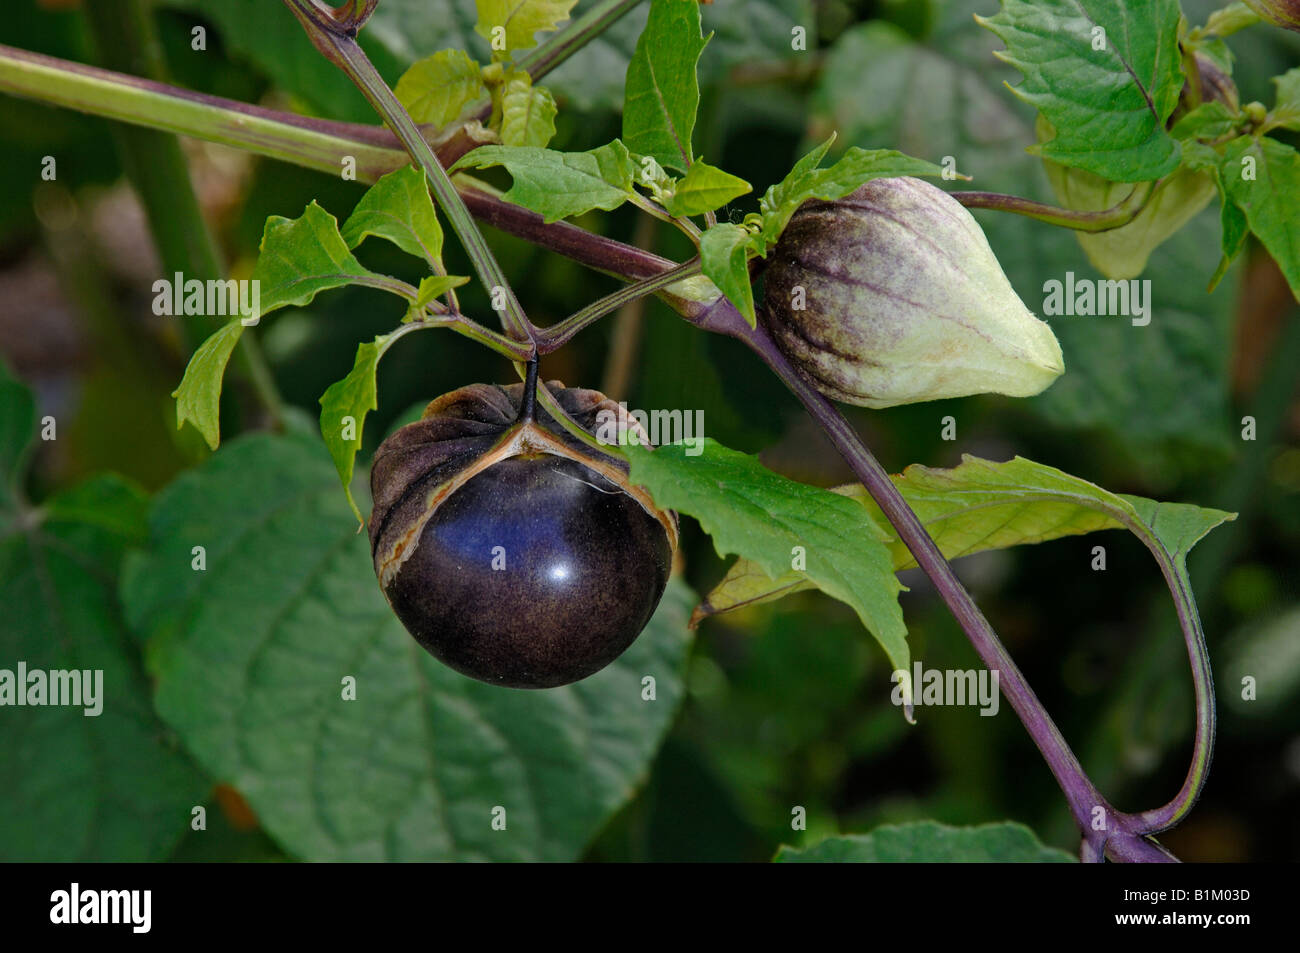 Tomatillo (Physalis ixocarpa, Physalis philadelphica), variety Purple de Milpa twig with fruit and flower studio picture Stock Photo